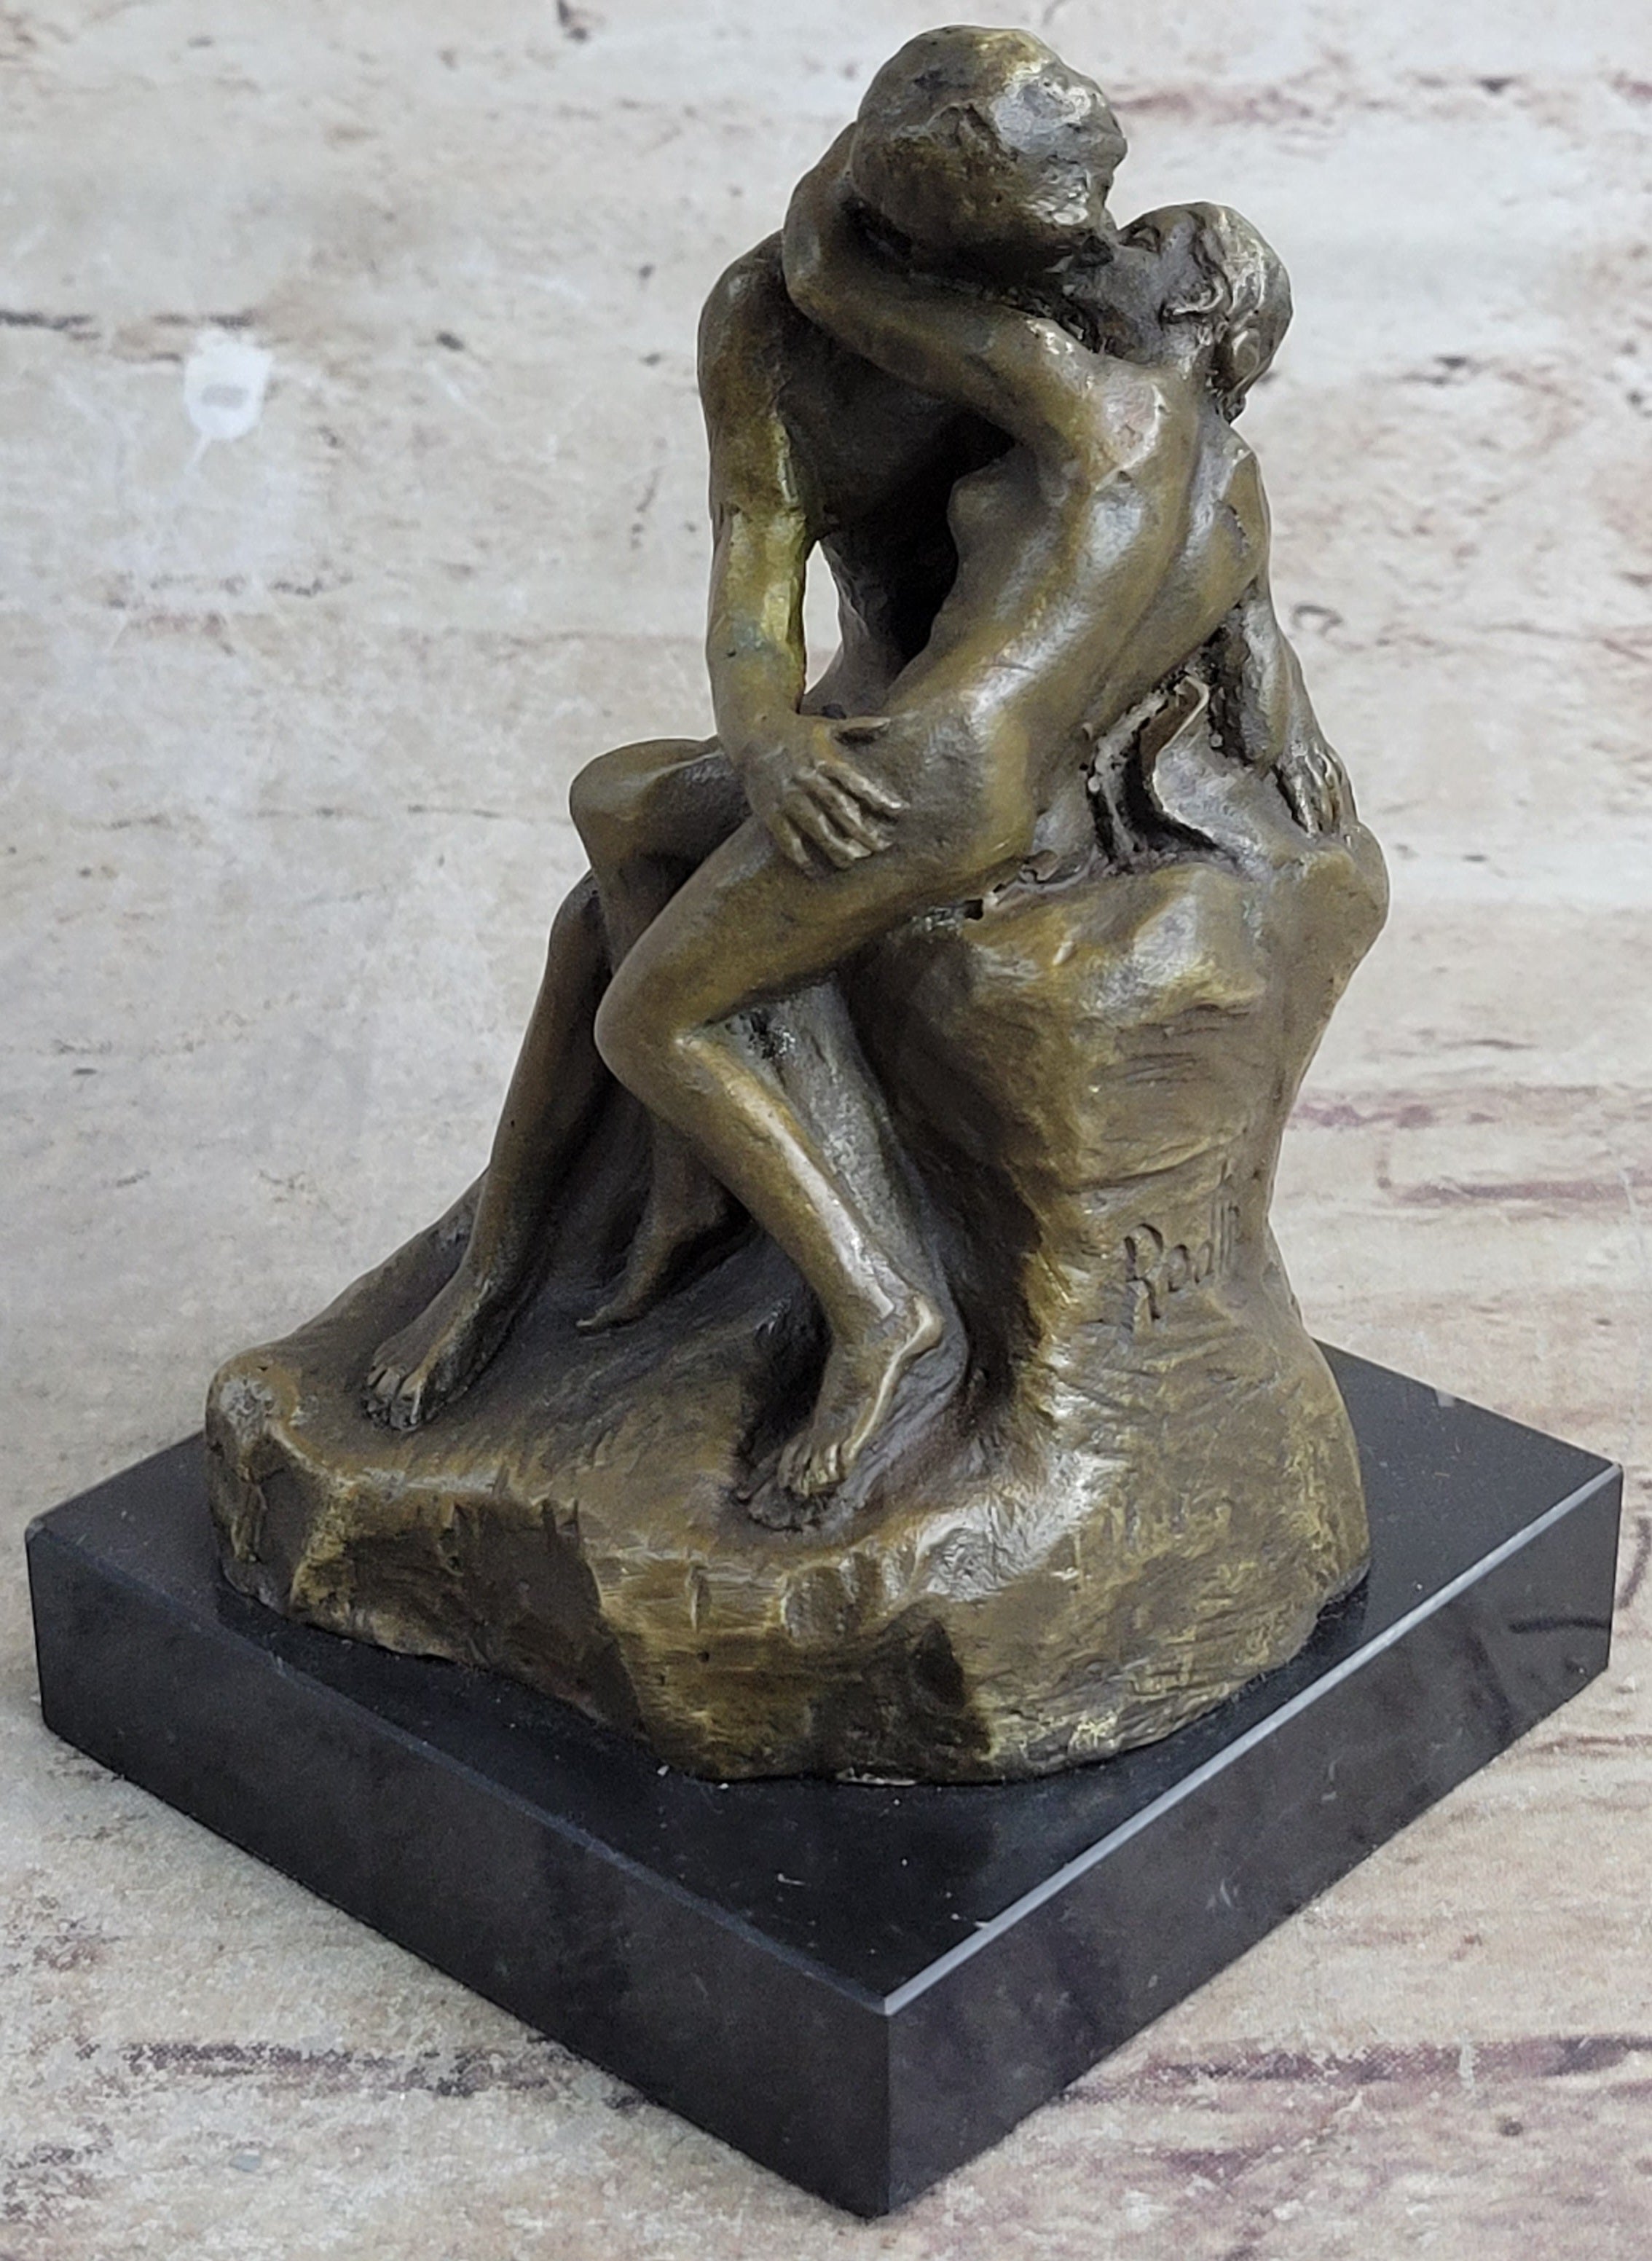 SIGNED BRONZE SCULPTURE FRENCH RODIN "THE KISS" CLASSIC STATUE ON MARBLE HOTCAST